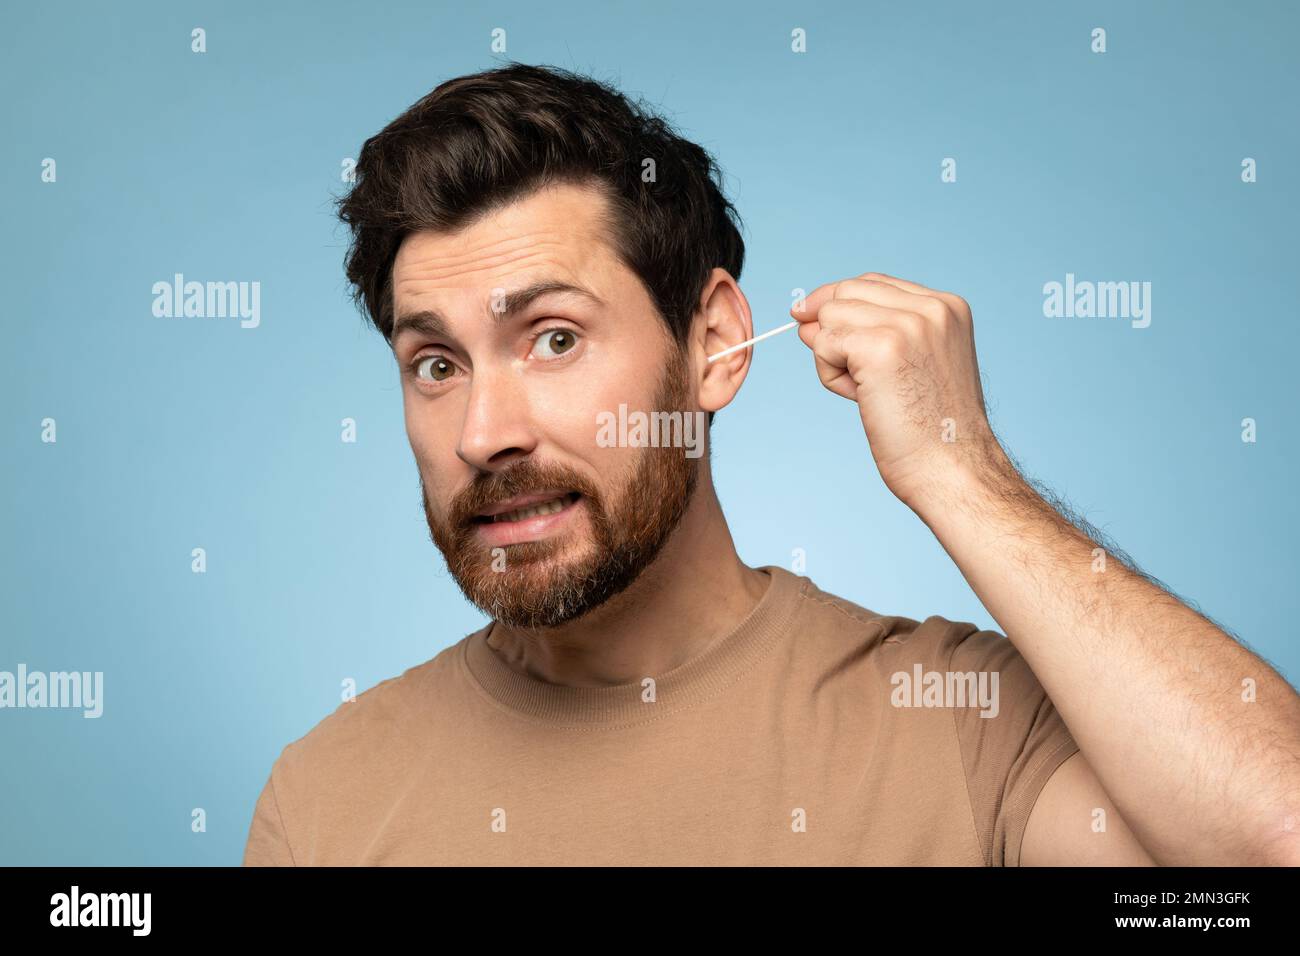 Funny middle aged bearded man cleaning ears with cotton swab, doing daily hygiene routine, blue studio background Stock Photo